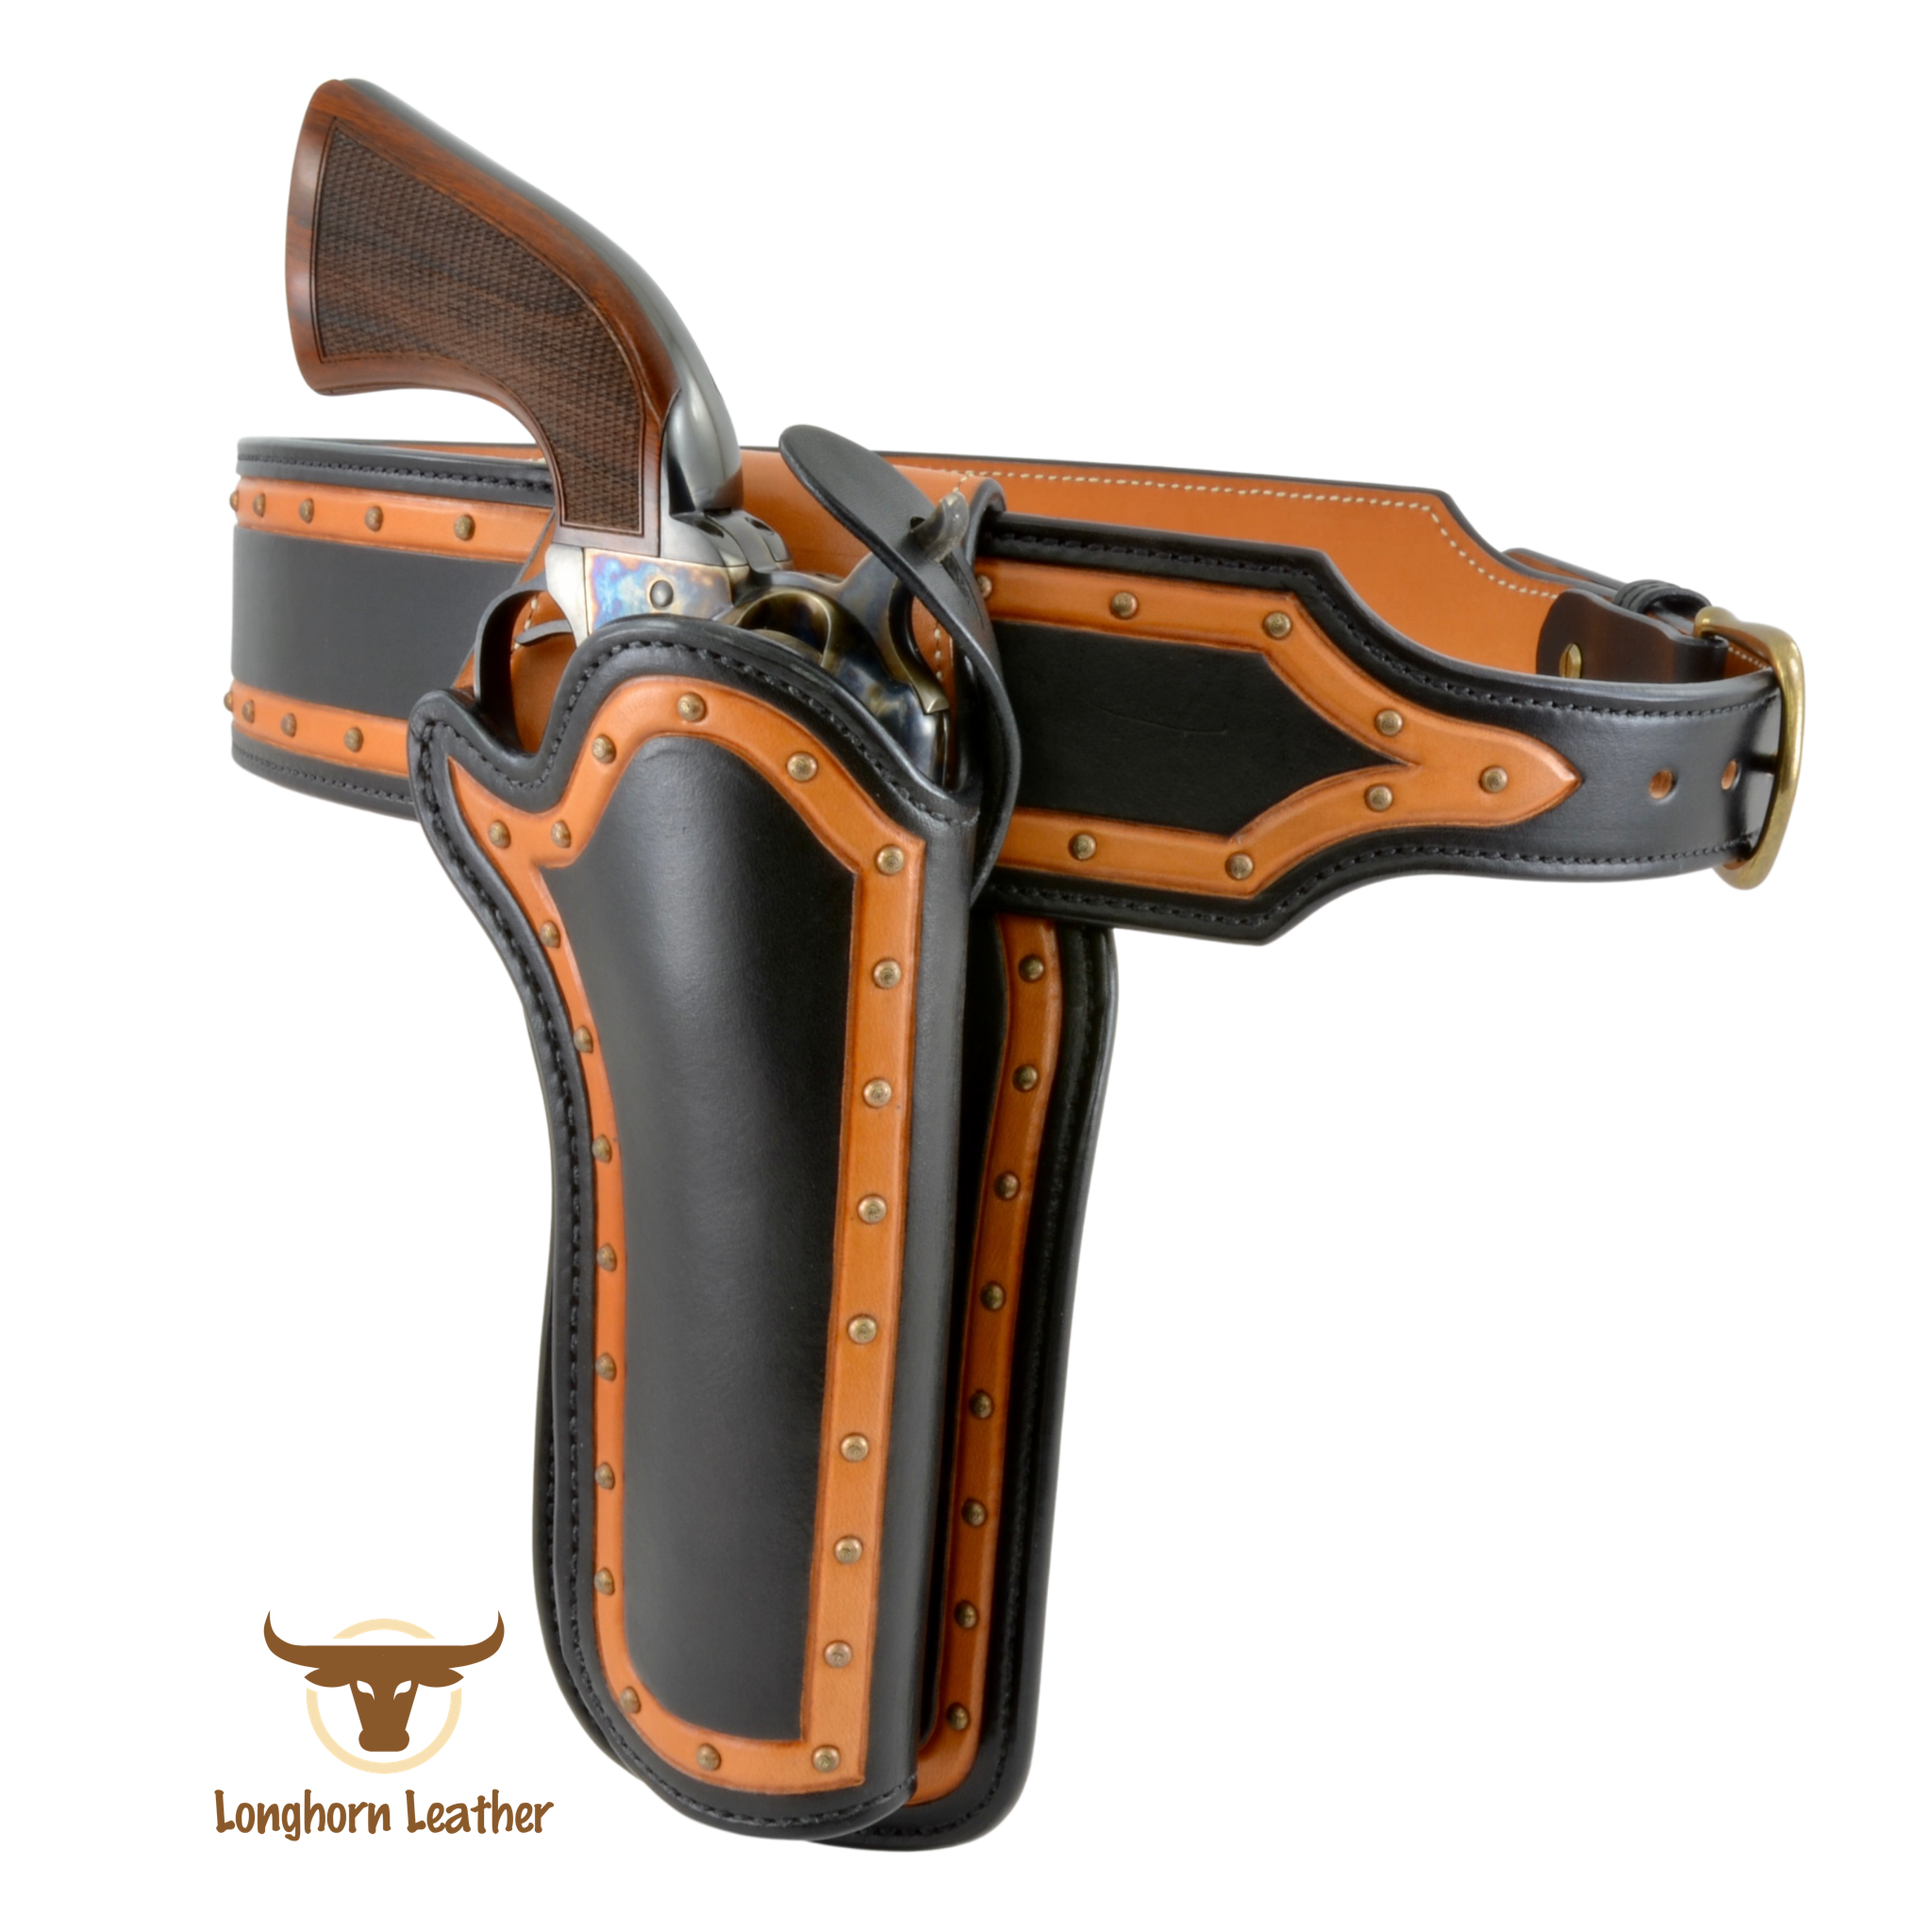 Custom leather single action holster and cartridge belt featuring the "Jerome" design.  Individually handcrafted at Longhorn Leather AZ.